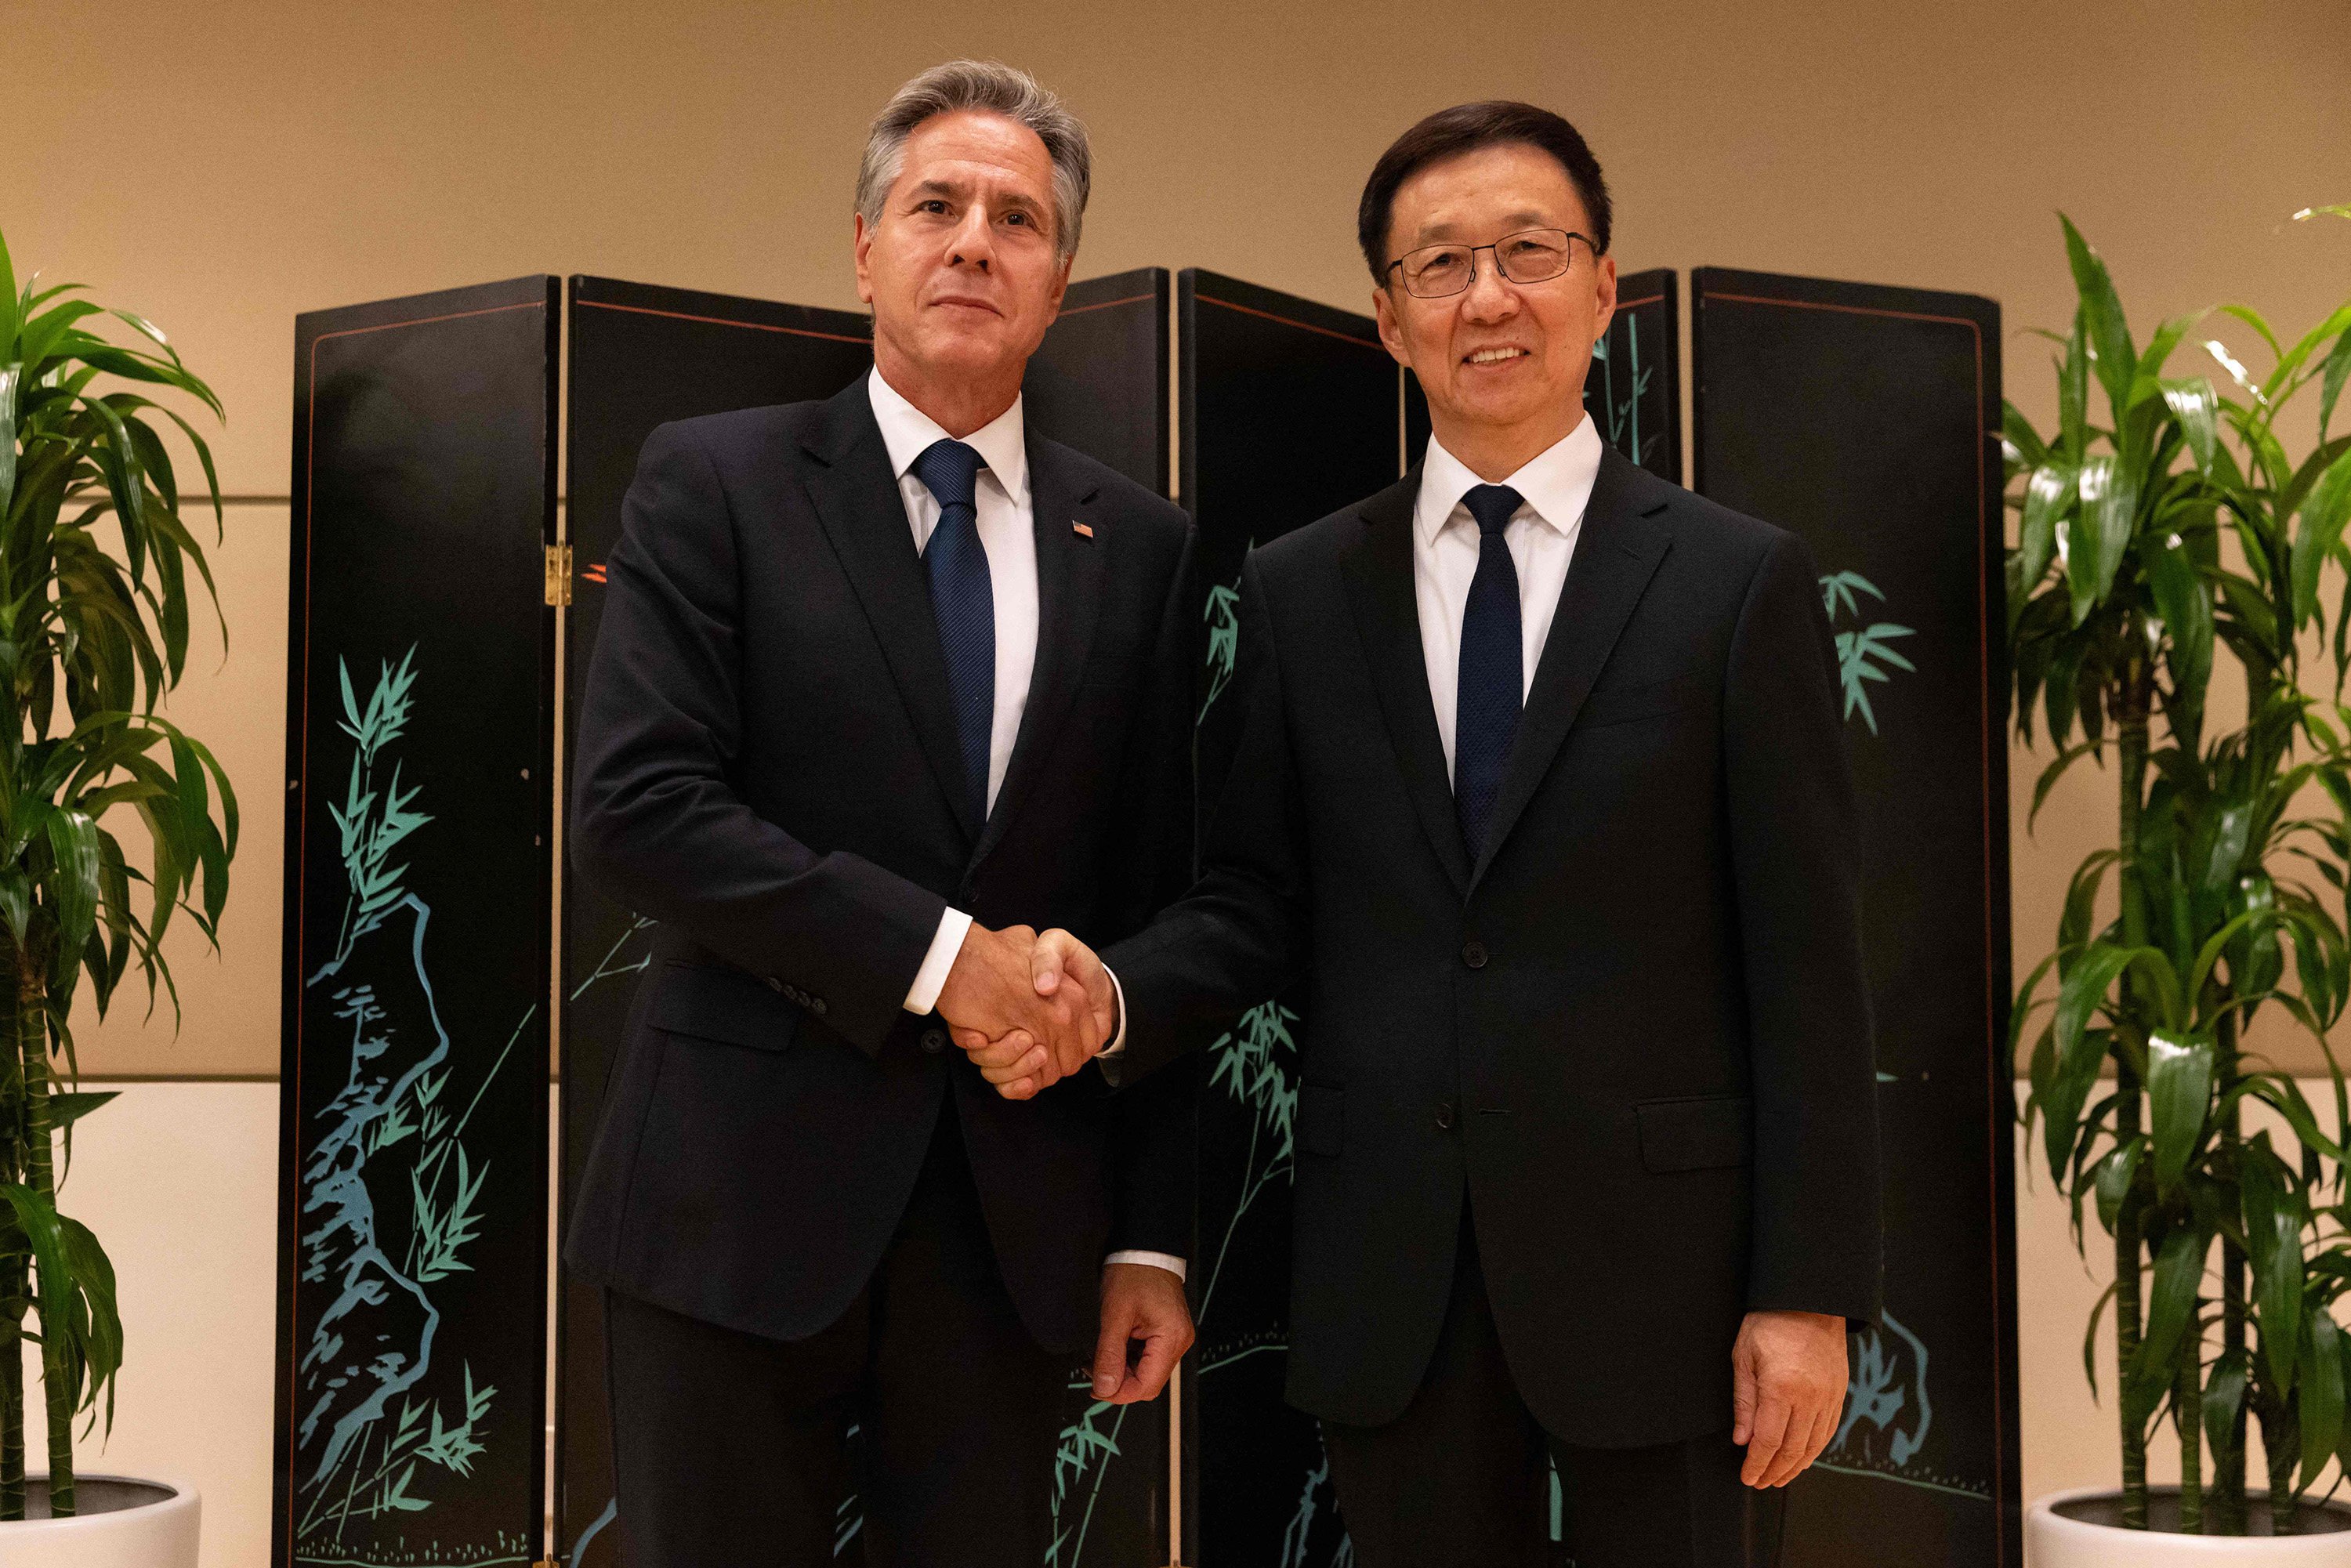 US Secretary of State Antony Blinken and Chinese Vice-president Han Zheng shake hands on the sidelines of the UN General Assembly in New York on September 18. Photo: TNS